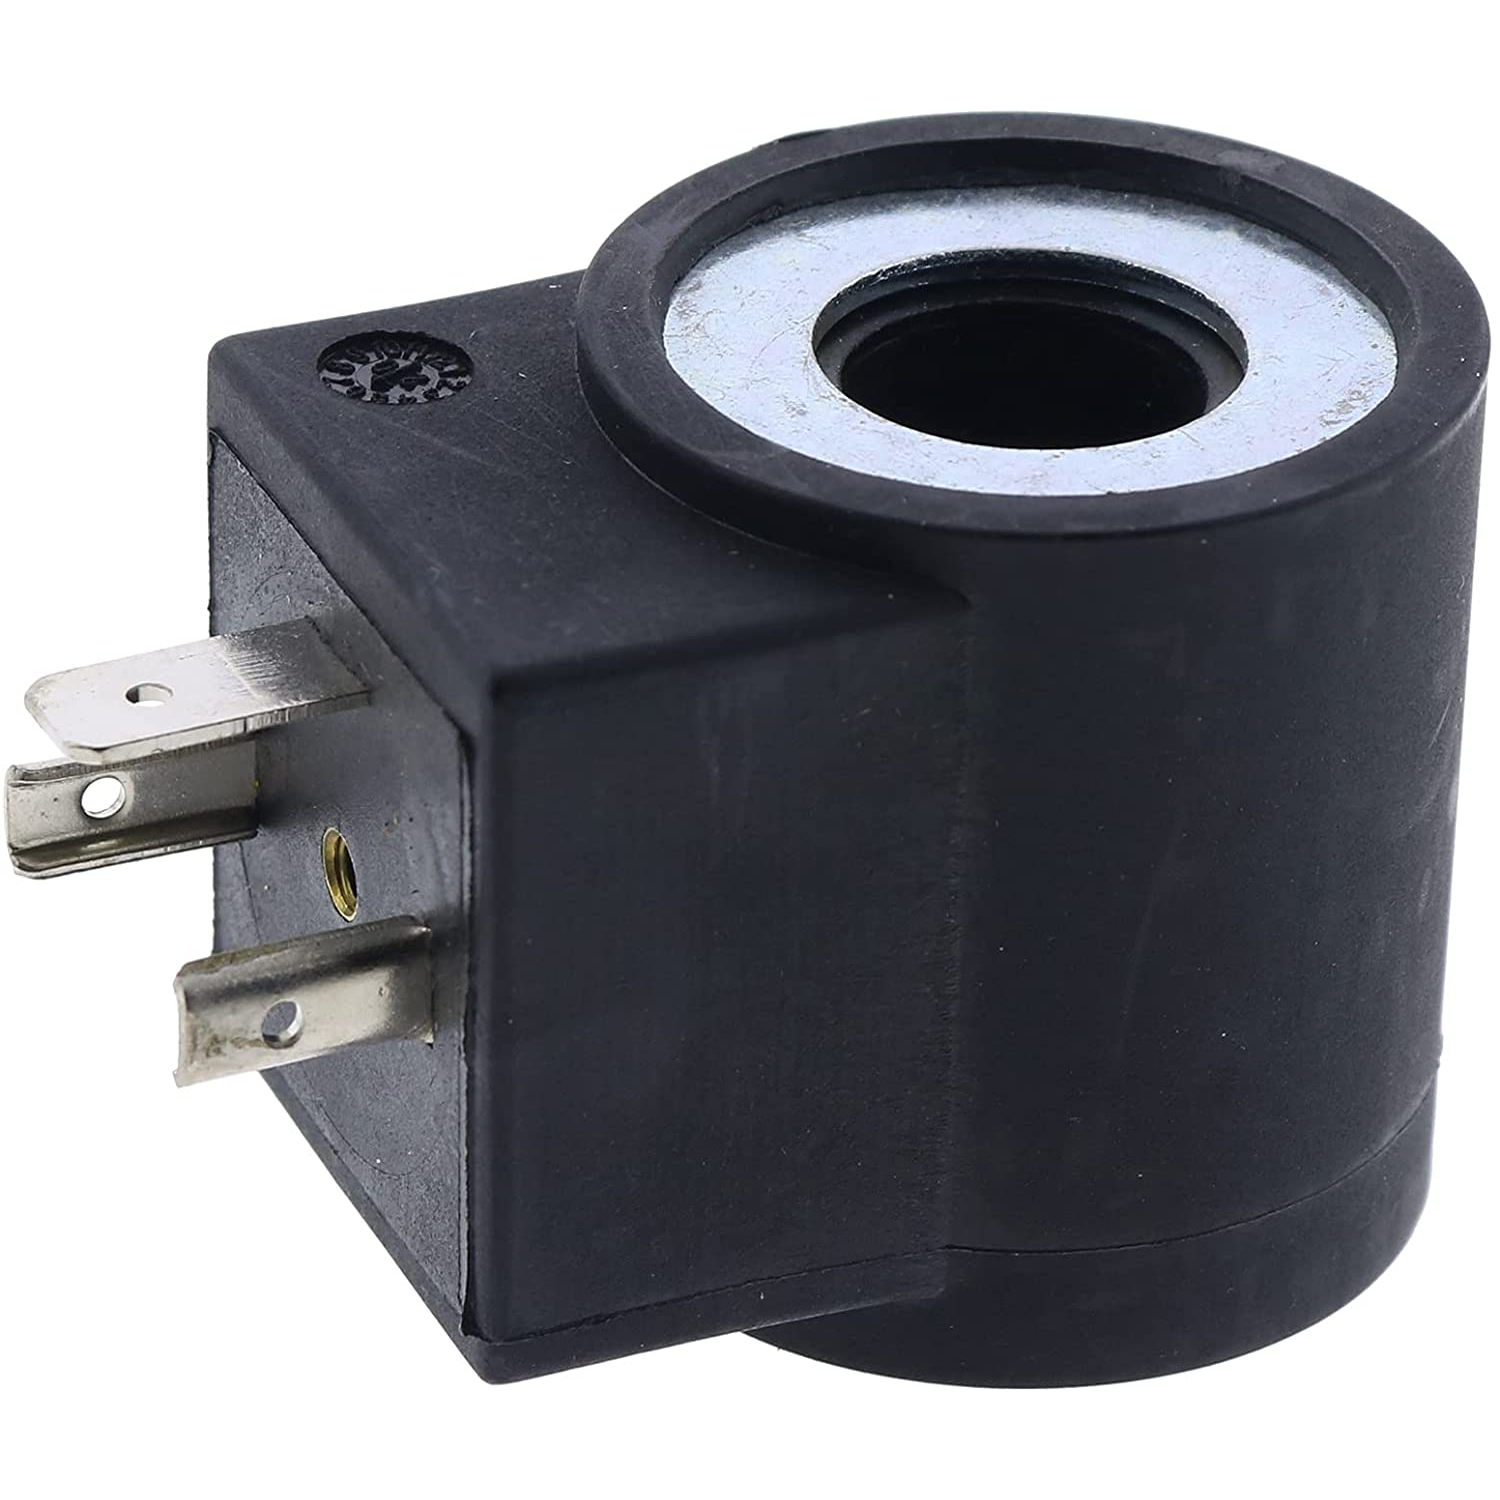 Cylindrical Solenoid Valve Coil (3/4'' Hole) 6306012 with 3 Prongs DIN Connector 24V DC Compatible with HydraForce Valve Stem Series 08 80 88 98 - KUDUPARTS